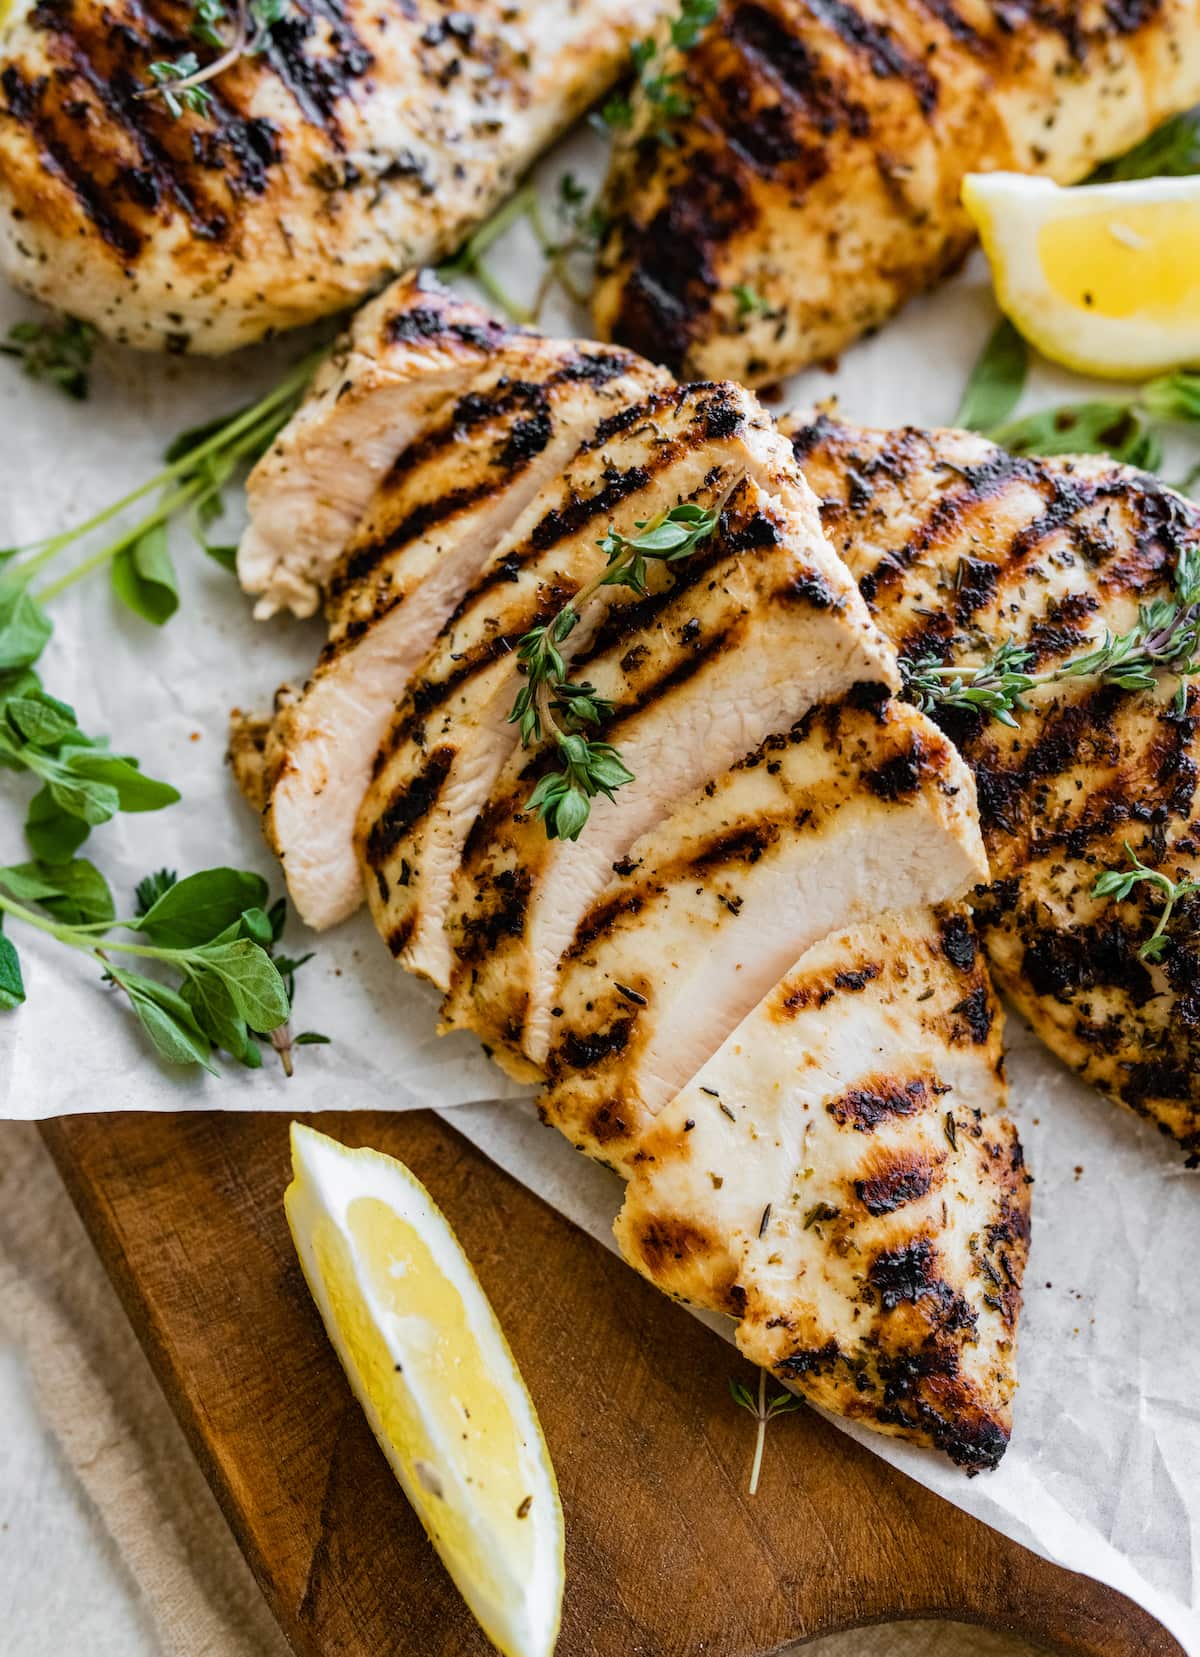 Sliced grilled chicken breast on a cutting board with fresh herbs and lemon slices.